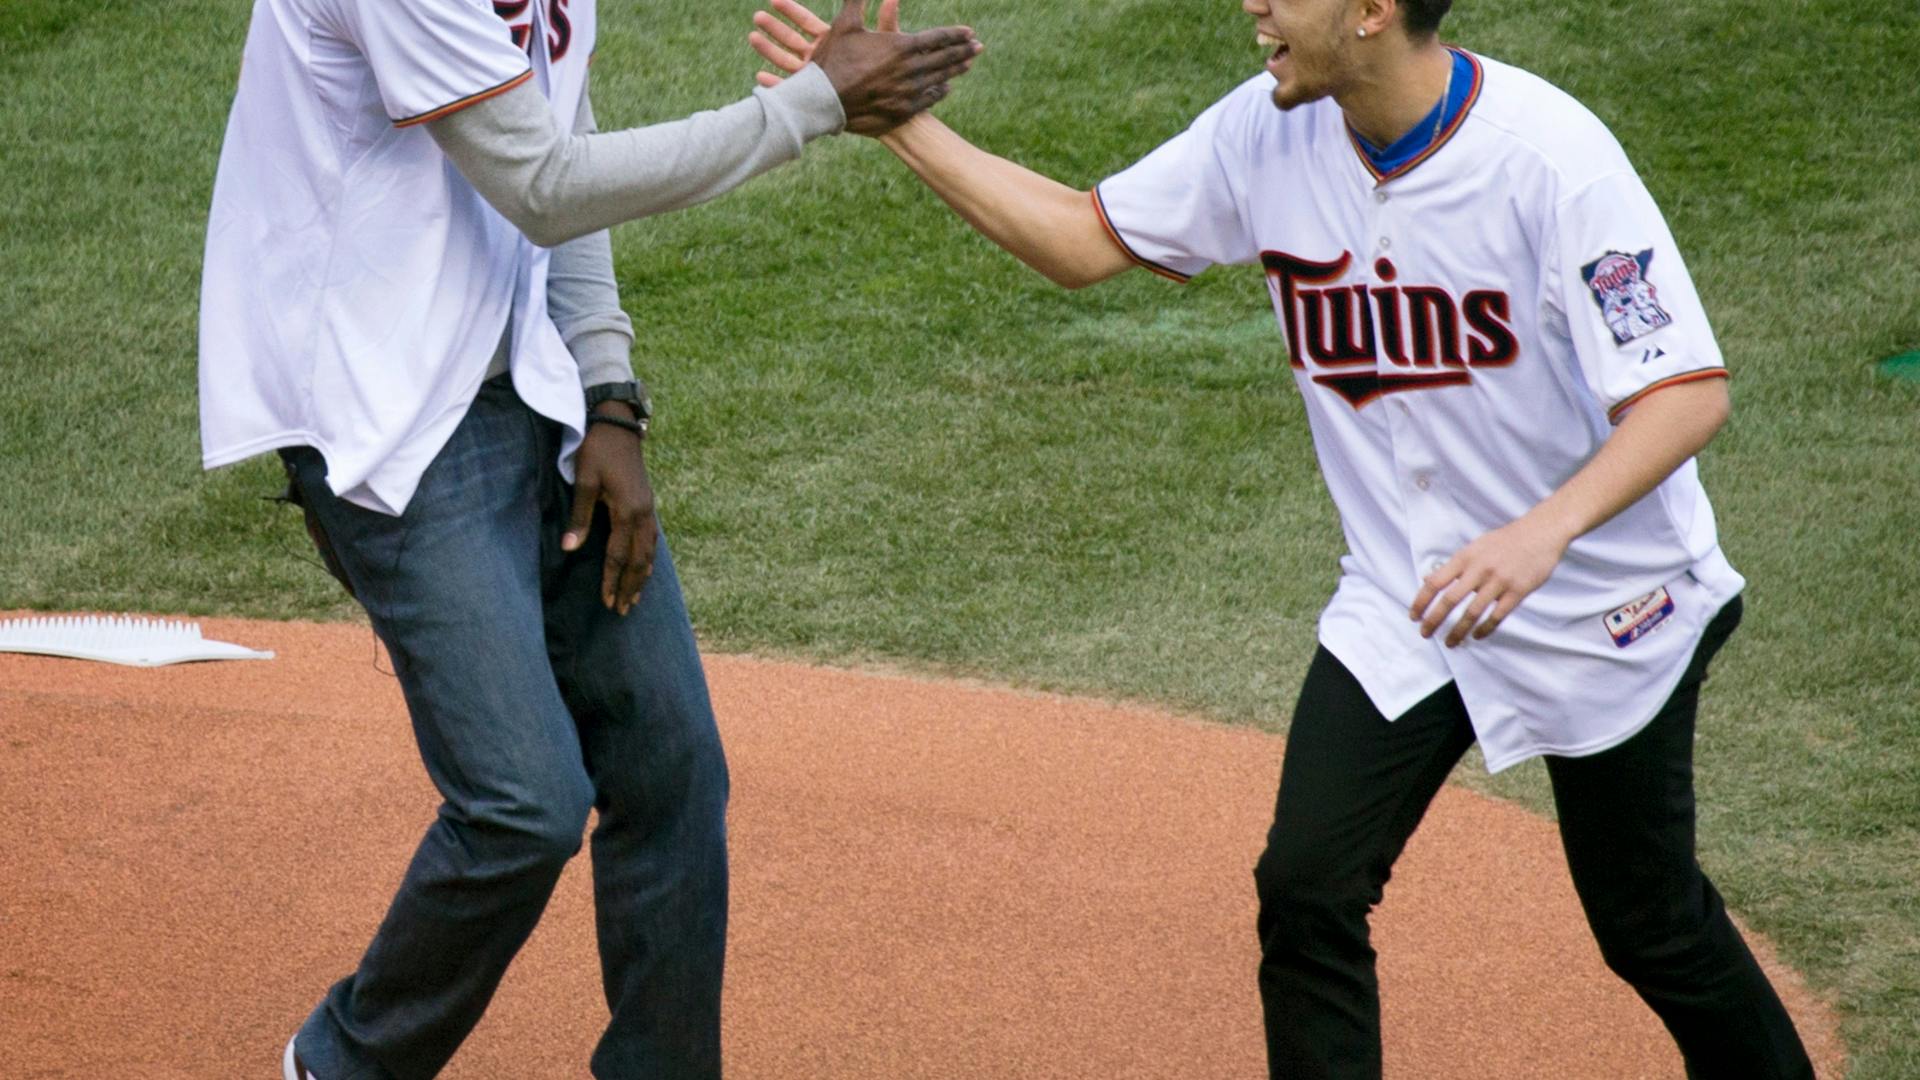 Duke guard and Apple Valley product Tyus Jones participated in the first pitch of the Twins home opener on Monday, joining outfielder Torii Hunter and Wolves forward Kevin Garnett at Target Field.